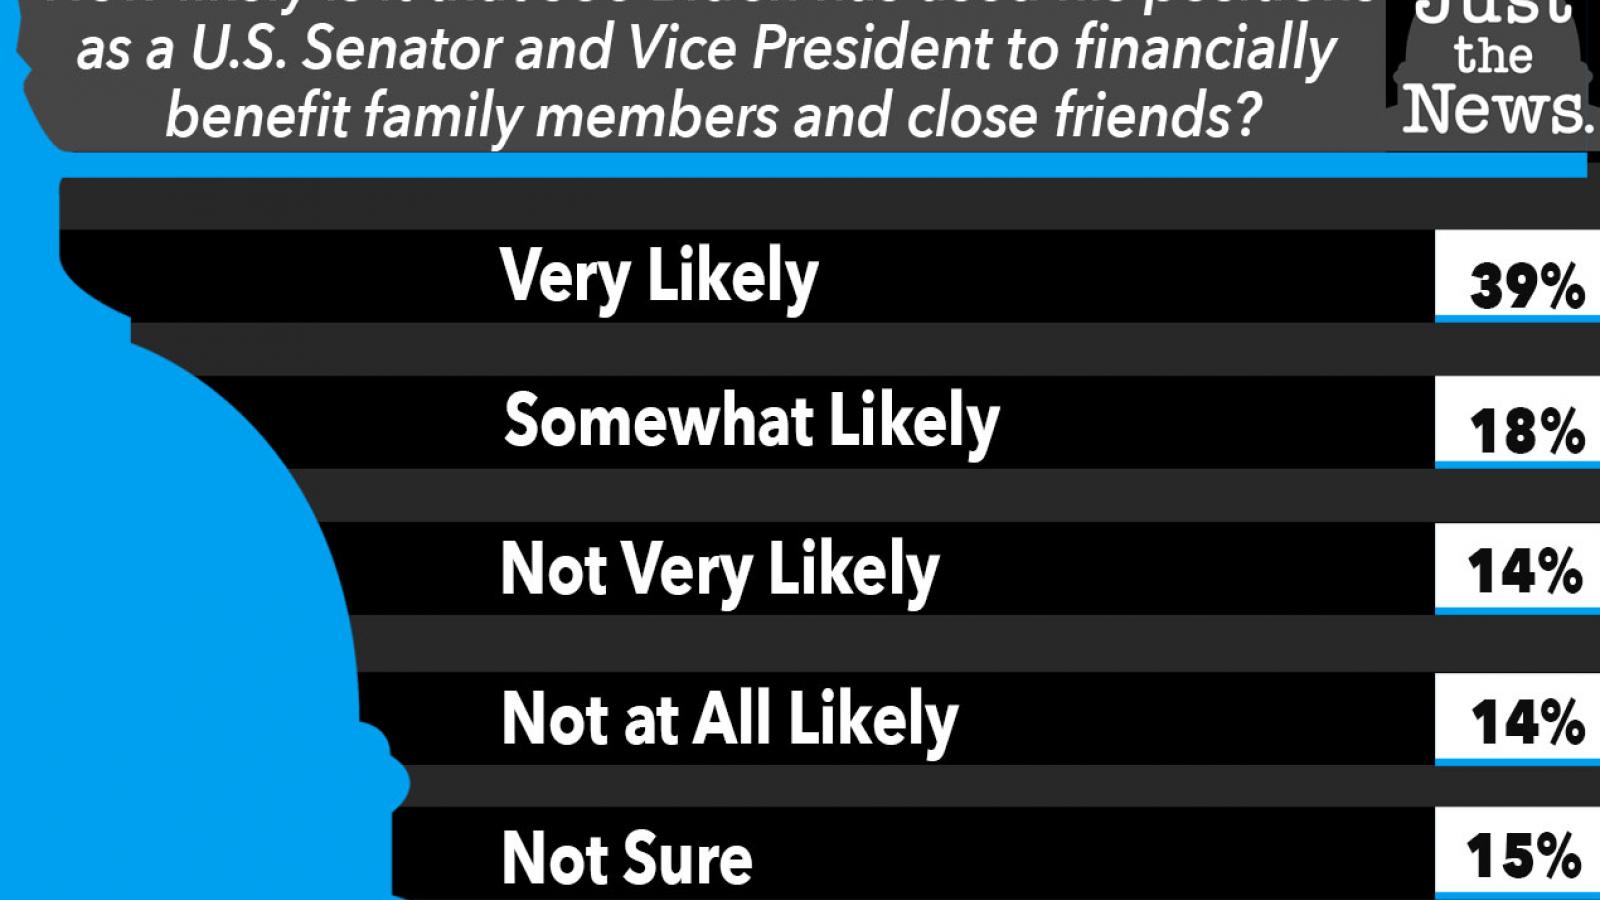 How likely is it that Joe Biden has used his positions as a U.S. Senator and Vice President to financially benefit family members and close friends?